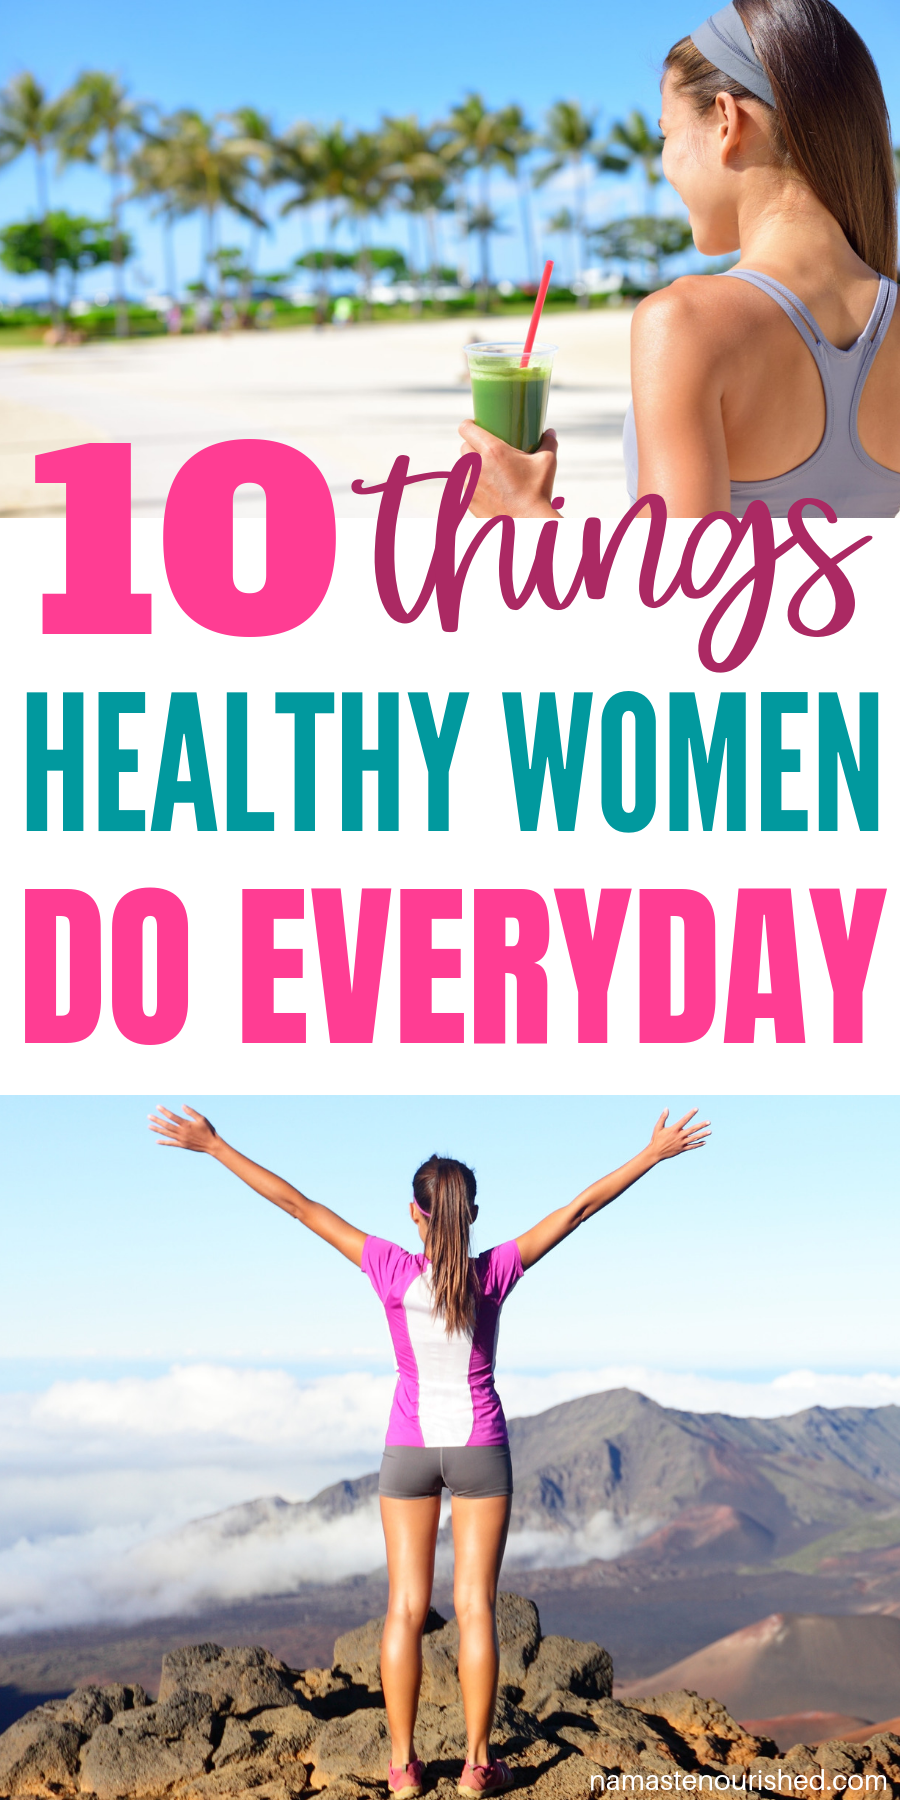 10 Things Healthy Women Do Every Day - Namaste Nourished -   18 fitness Lifestyle tips ideas